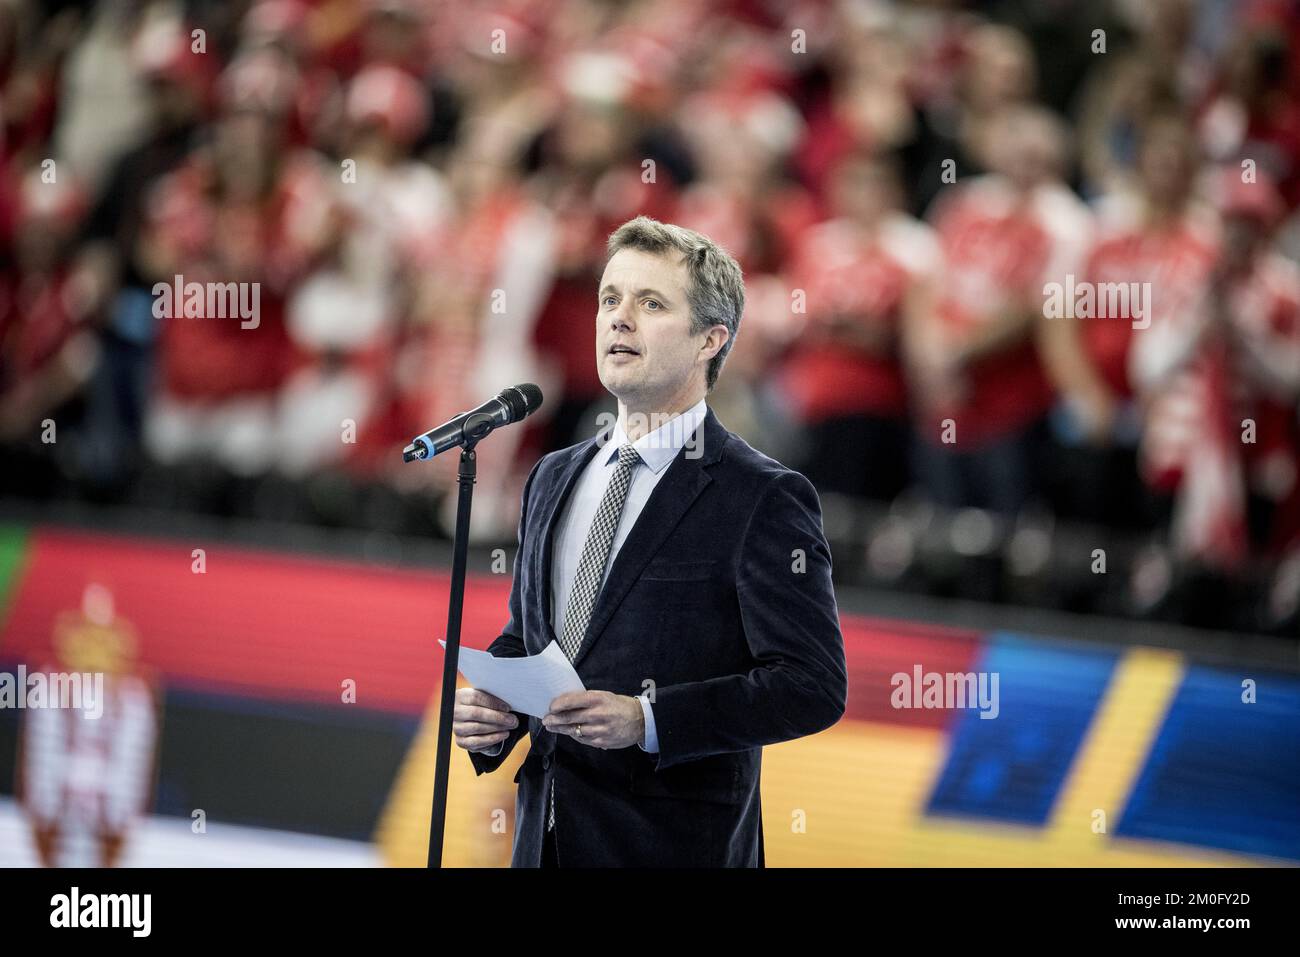 On January 10th 2019 HRH Crown Prince Frederik officially opened the Danish hostship of the Men's World Handball Championship in Copenhagen's Royal Arena. The Crown Prince is protector for the Championships that Denmark hosts along with Germany. Denmark beat Chile in the following match with 39-16. Also in attendance were CEO of the Danish Handball Federation Morten Stig Kristensen, Lord Mayor Frank Jensen and Emmy winning actor Lars Mikkelsen Stock Photo